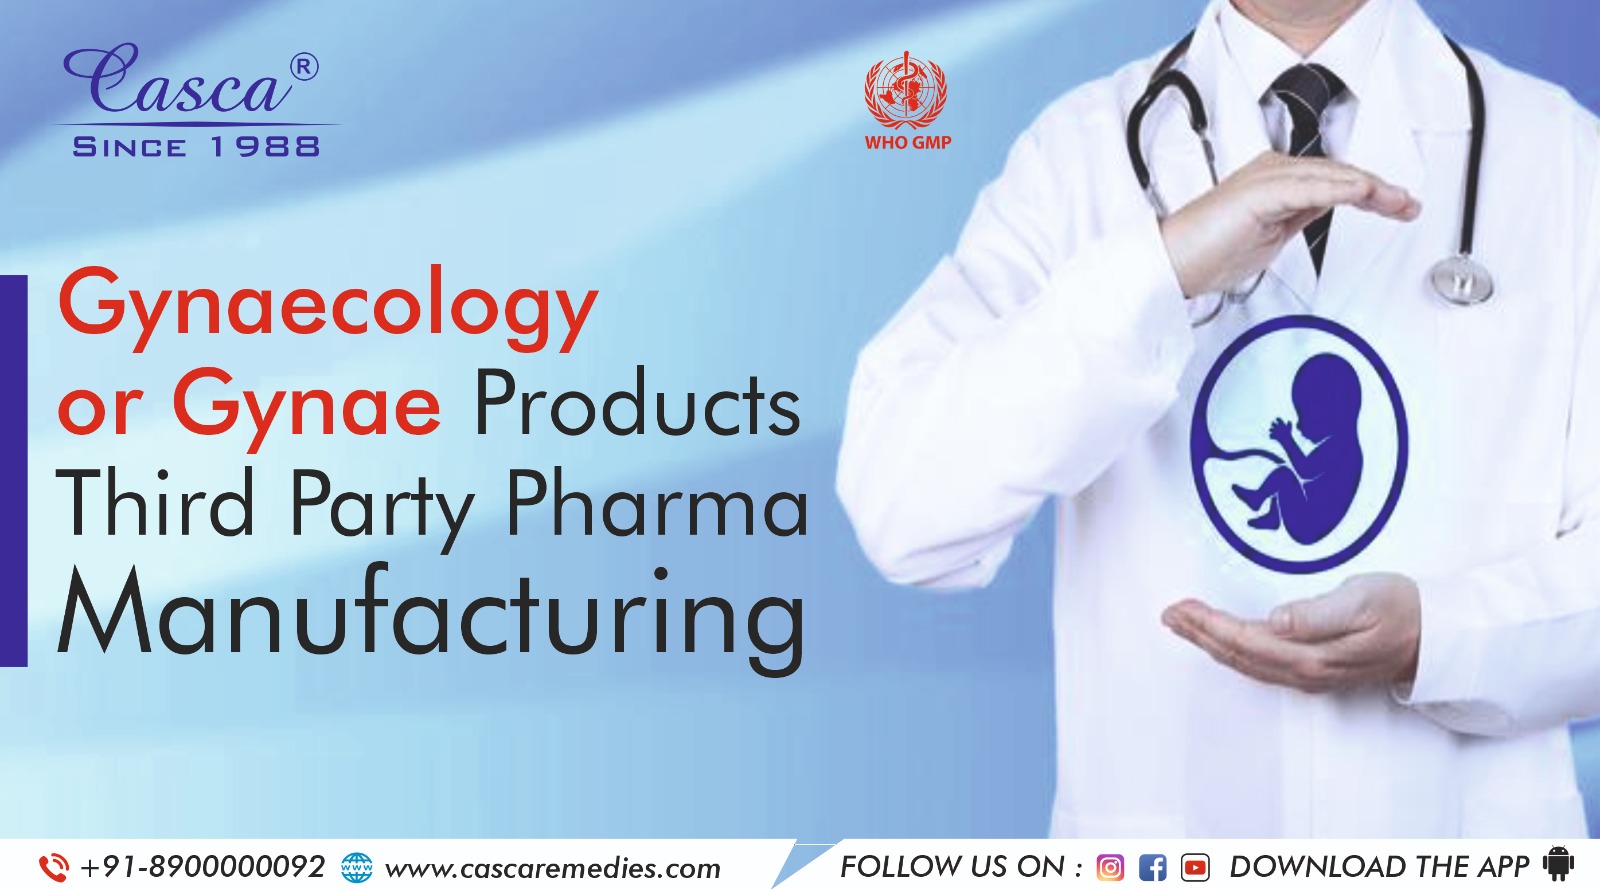 Gynaecological Products Range and third party pharma manufacturing